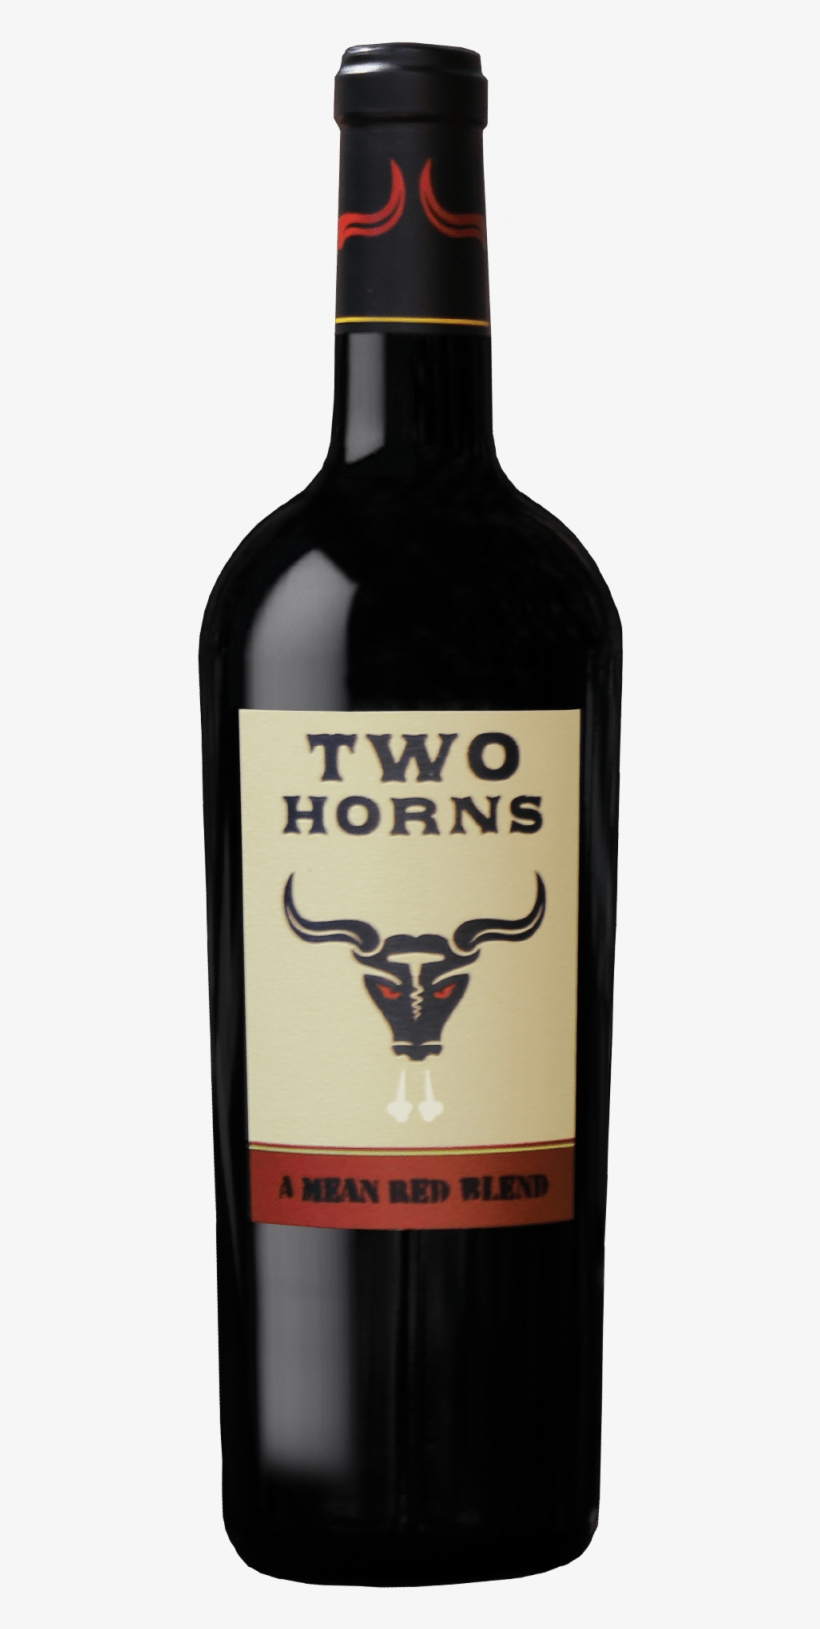 Two Horns A Mean Red, transparent png #3842104